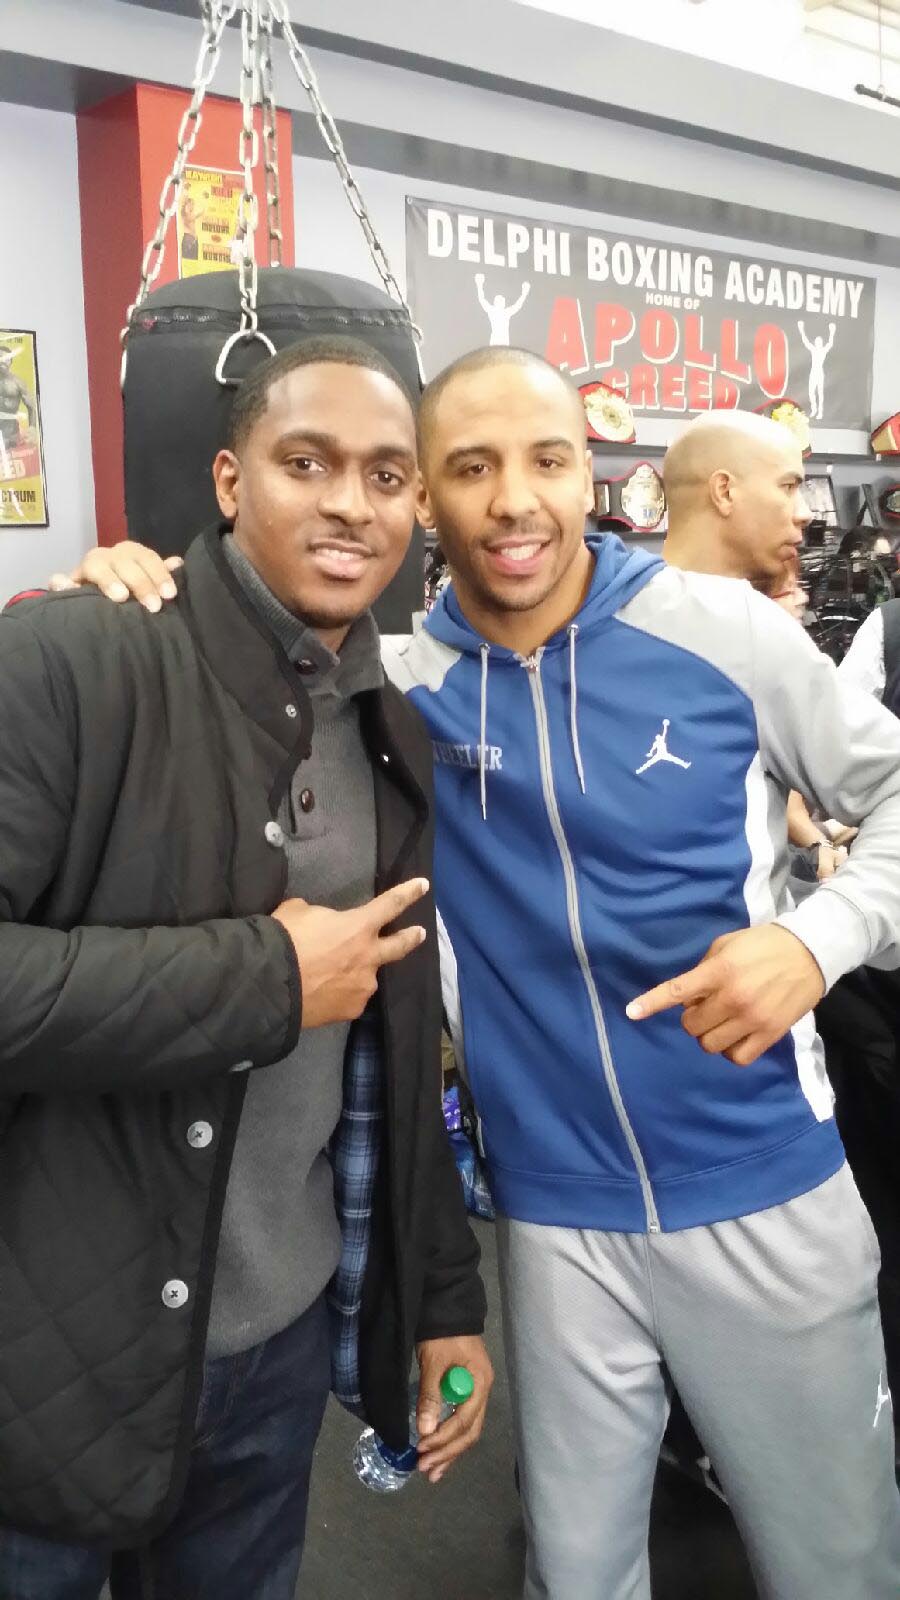 On set of Creed with the Super Middle Weight champion of the world, Andre Ward.